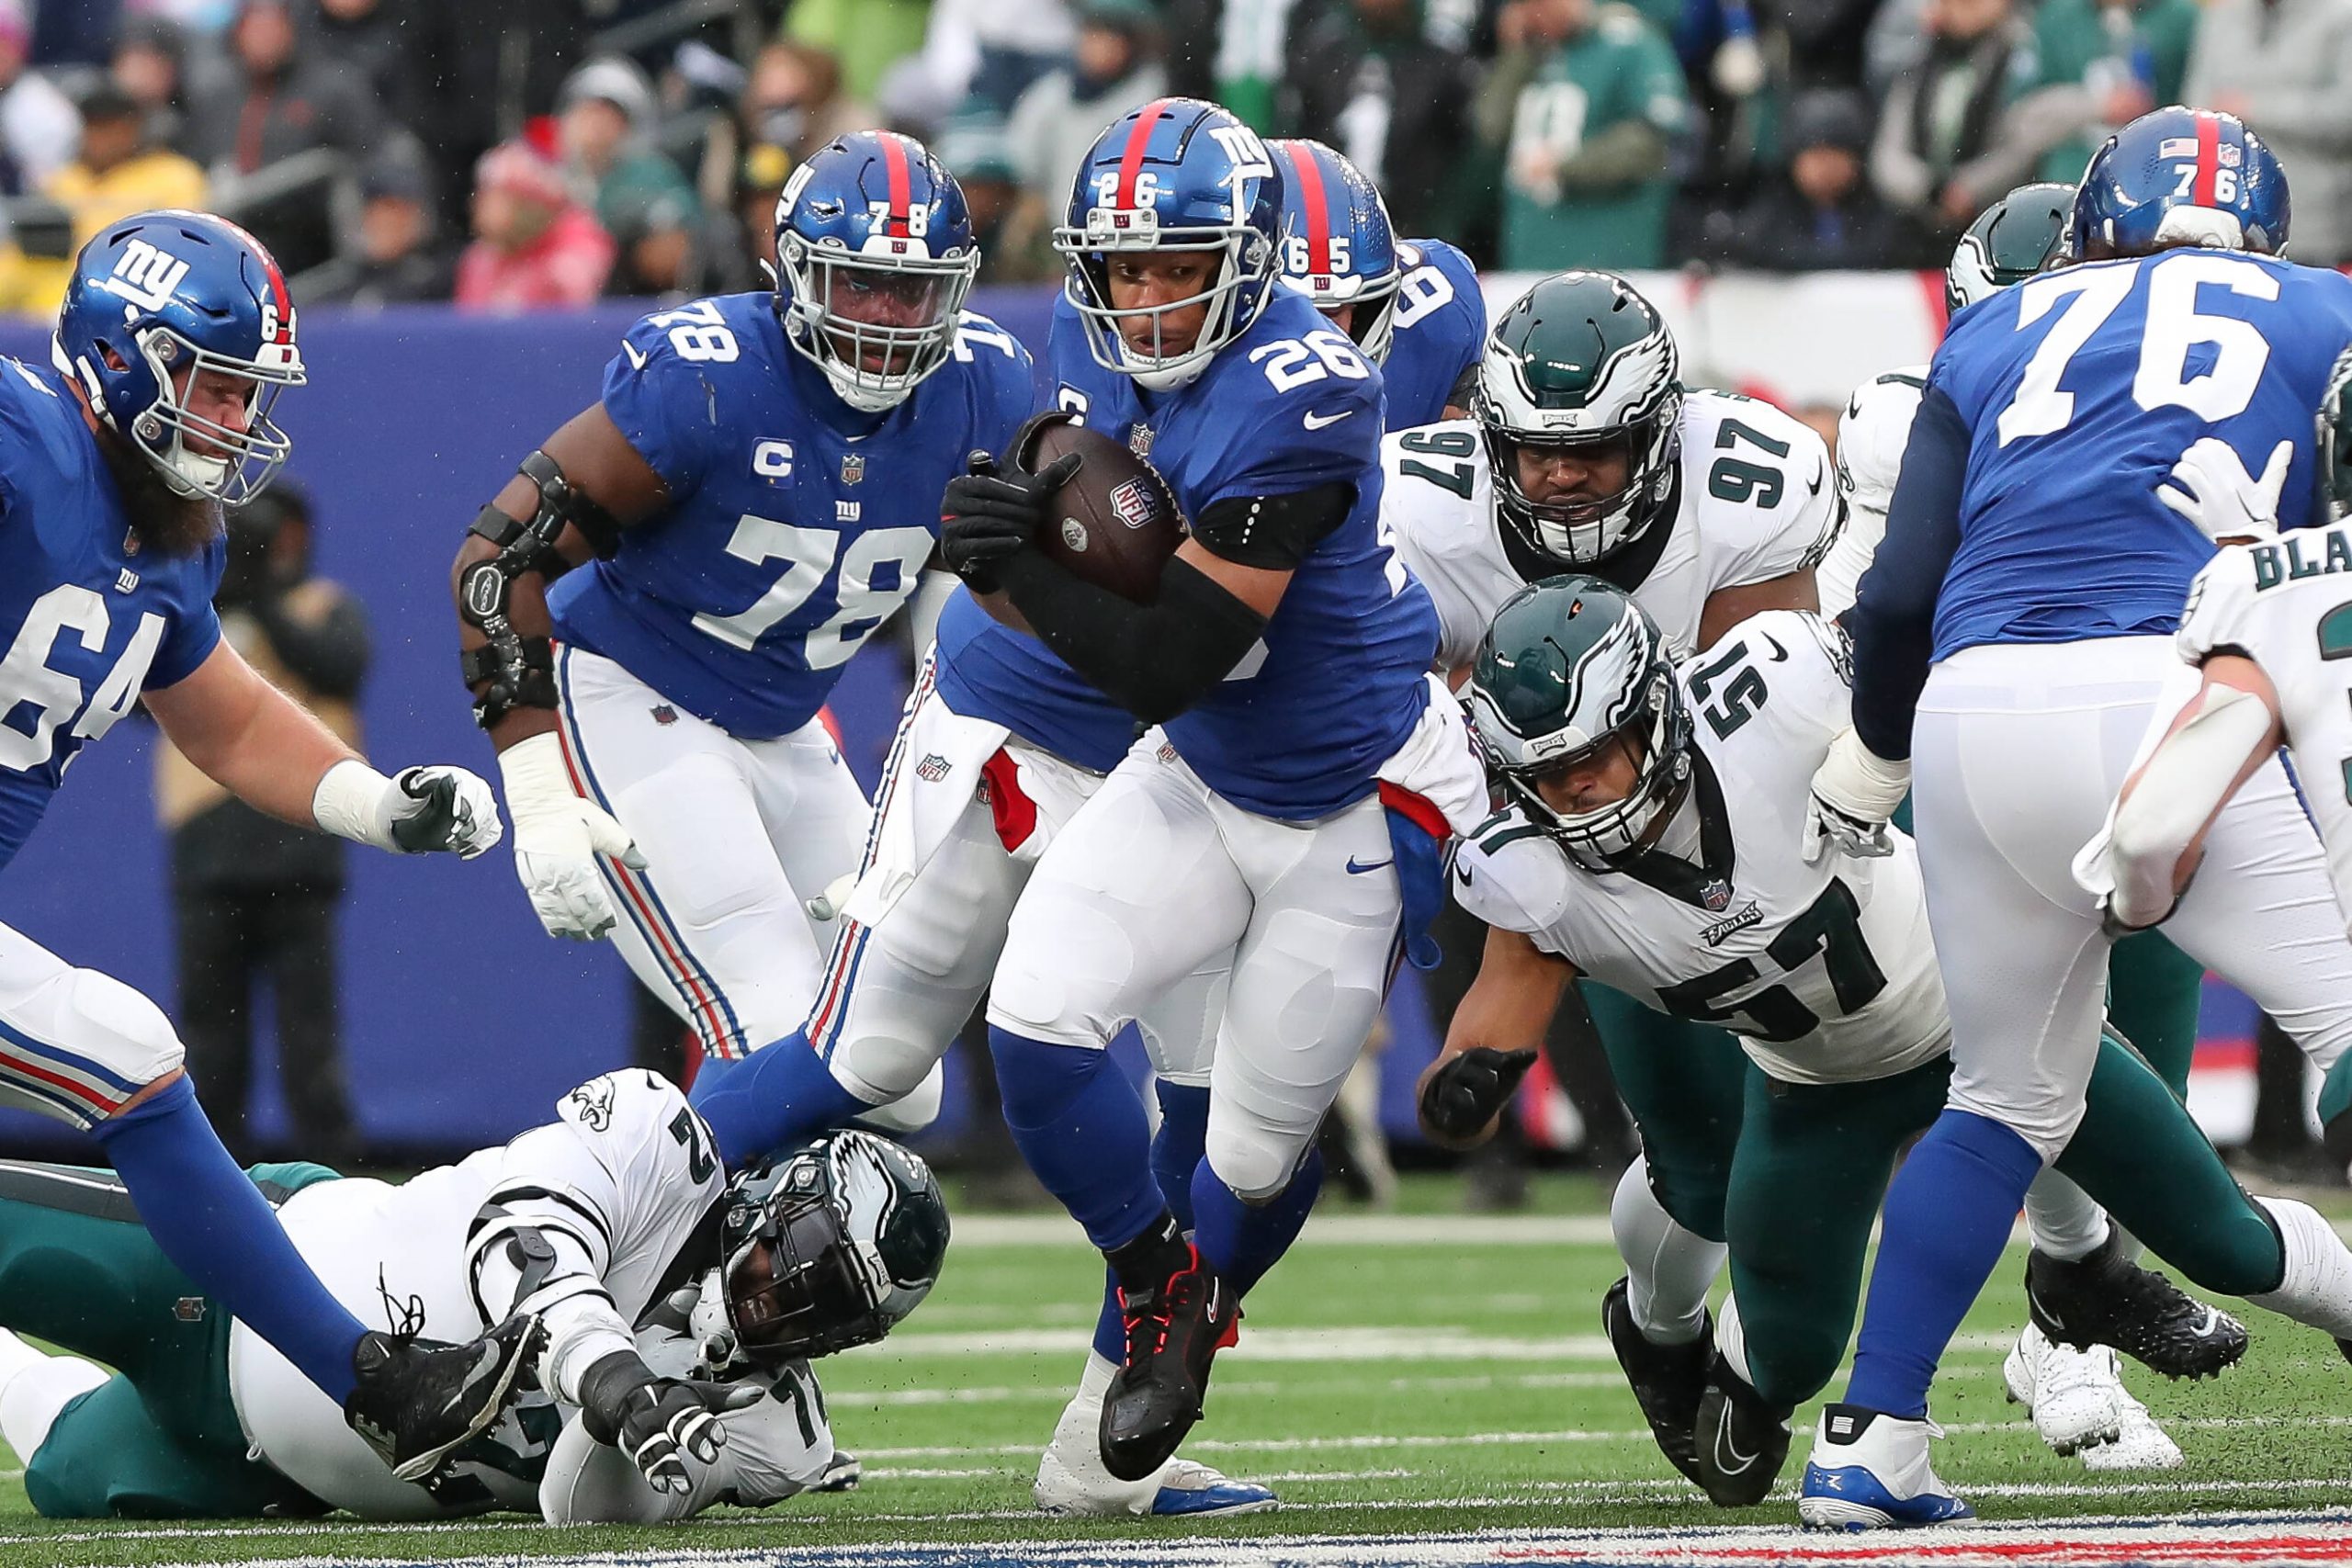 NFL, American Football Herren, USA Philadelphia Eagles at New York Giants Dec 11, 2022 East Rutherford, New Jersey, USA New York Giants running back Saquon Barkley 26 carries the ball against the Philadelphia Eagles during the second quarter at MetLife Stadium. East Rutherford MetLife Stadium New Jersey USA, EDITORIAL USE ONLY PUBLICATIONxINxGERxSUIxAUTxONLY Copyright: xTomxHorakx 20221211_jcd_vw6_0255